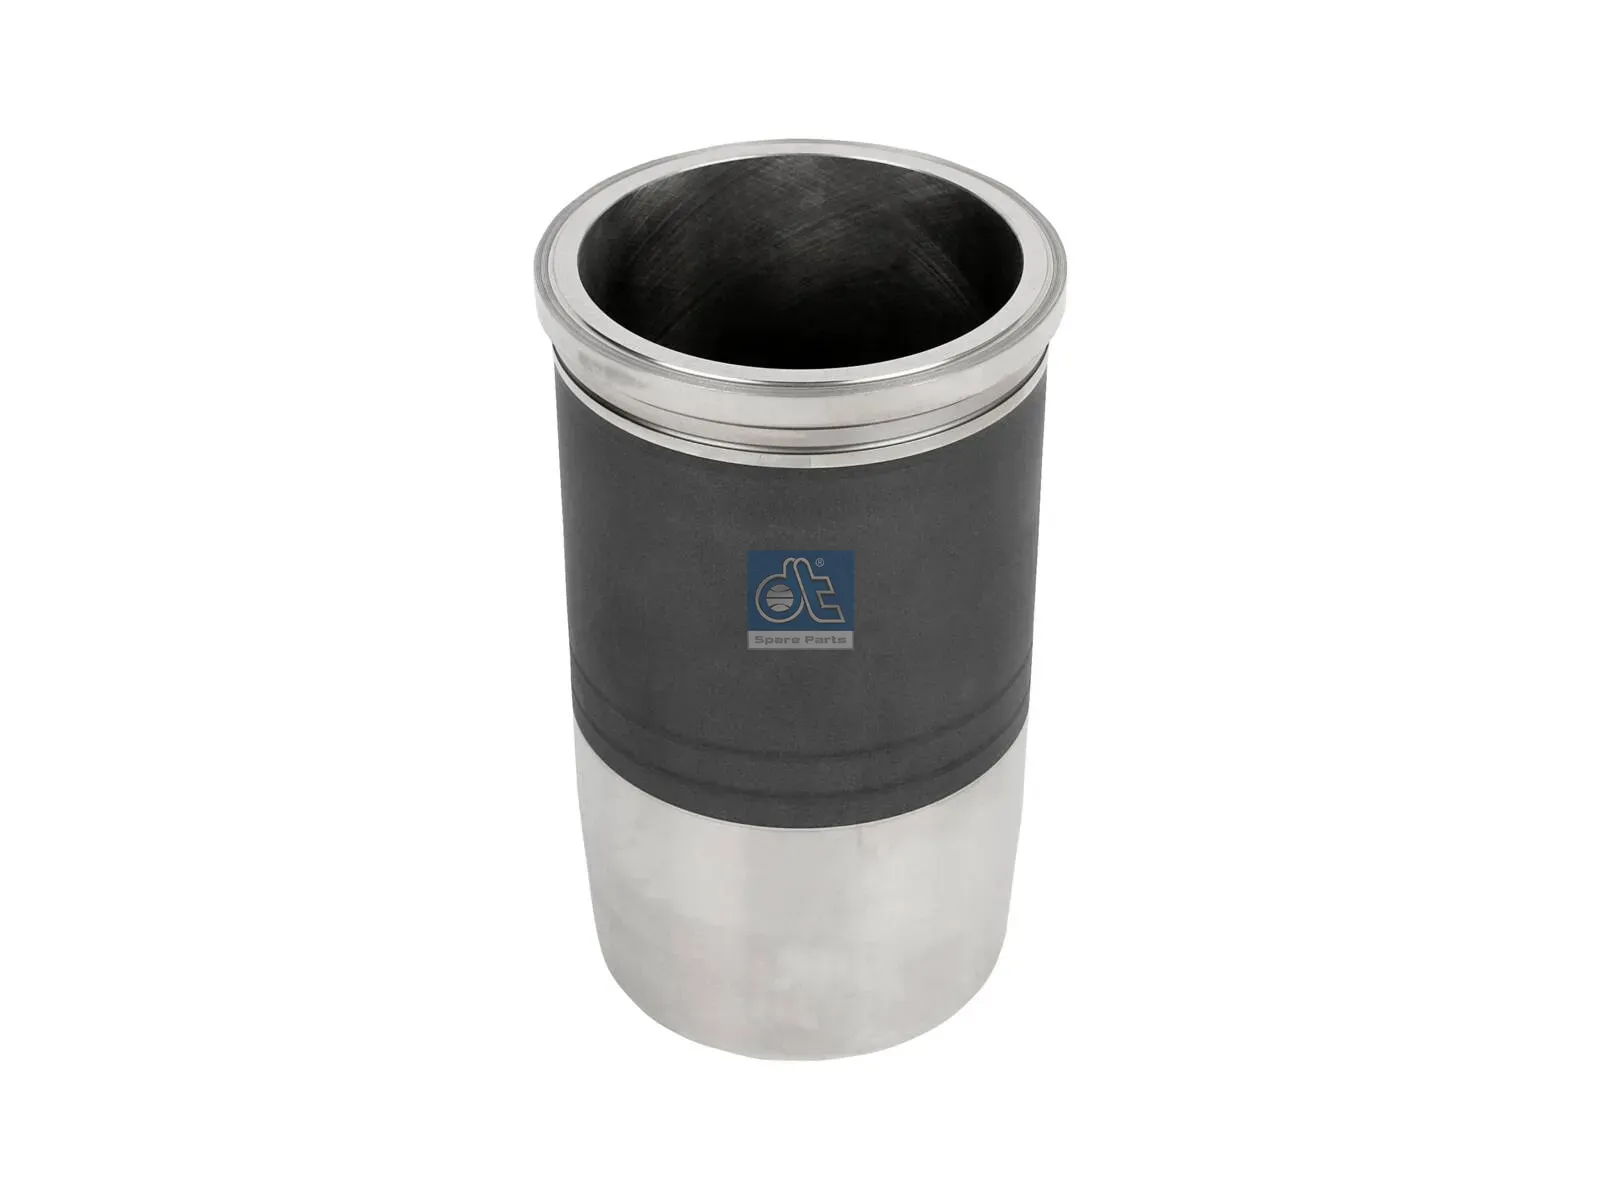 Cylinder liner, without seal rings